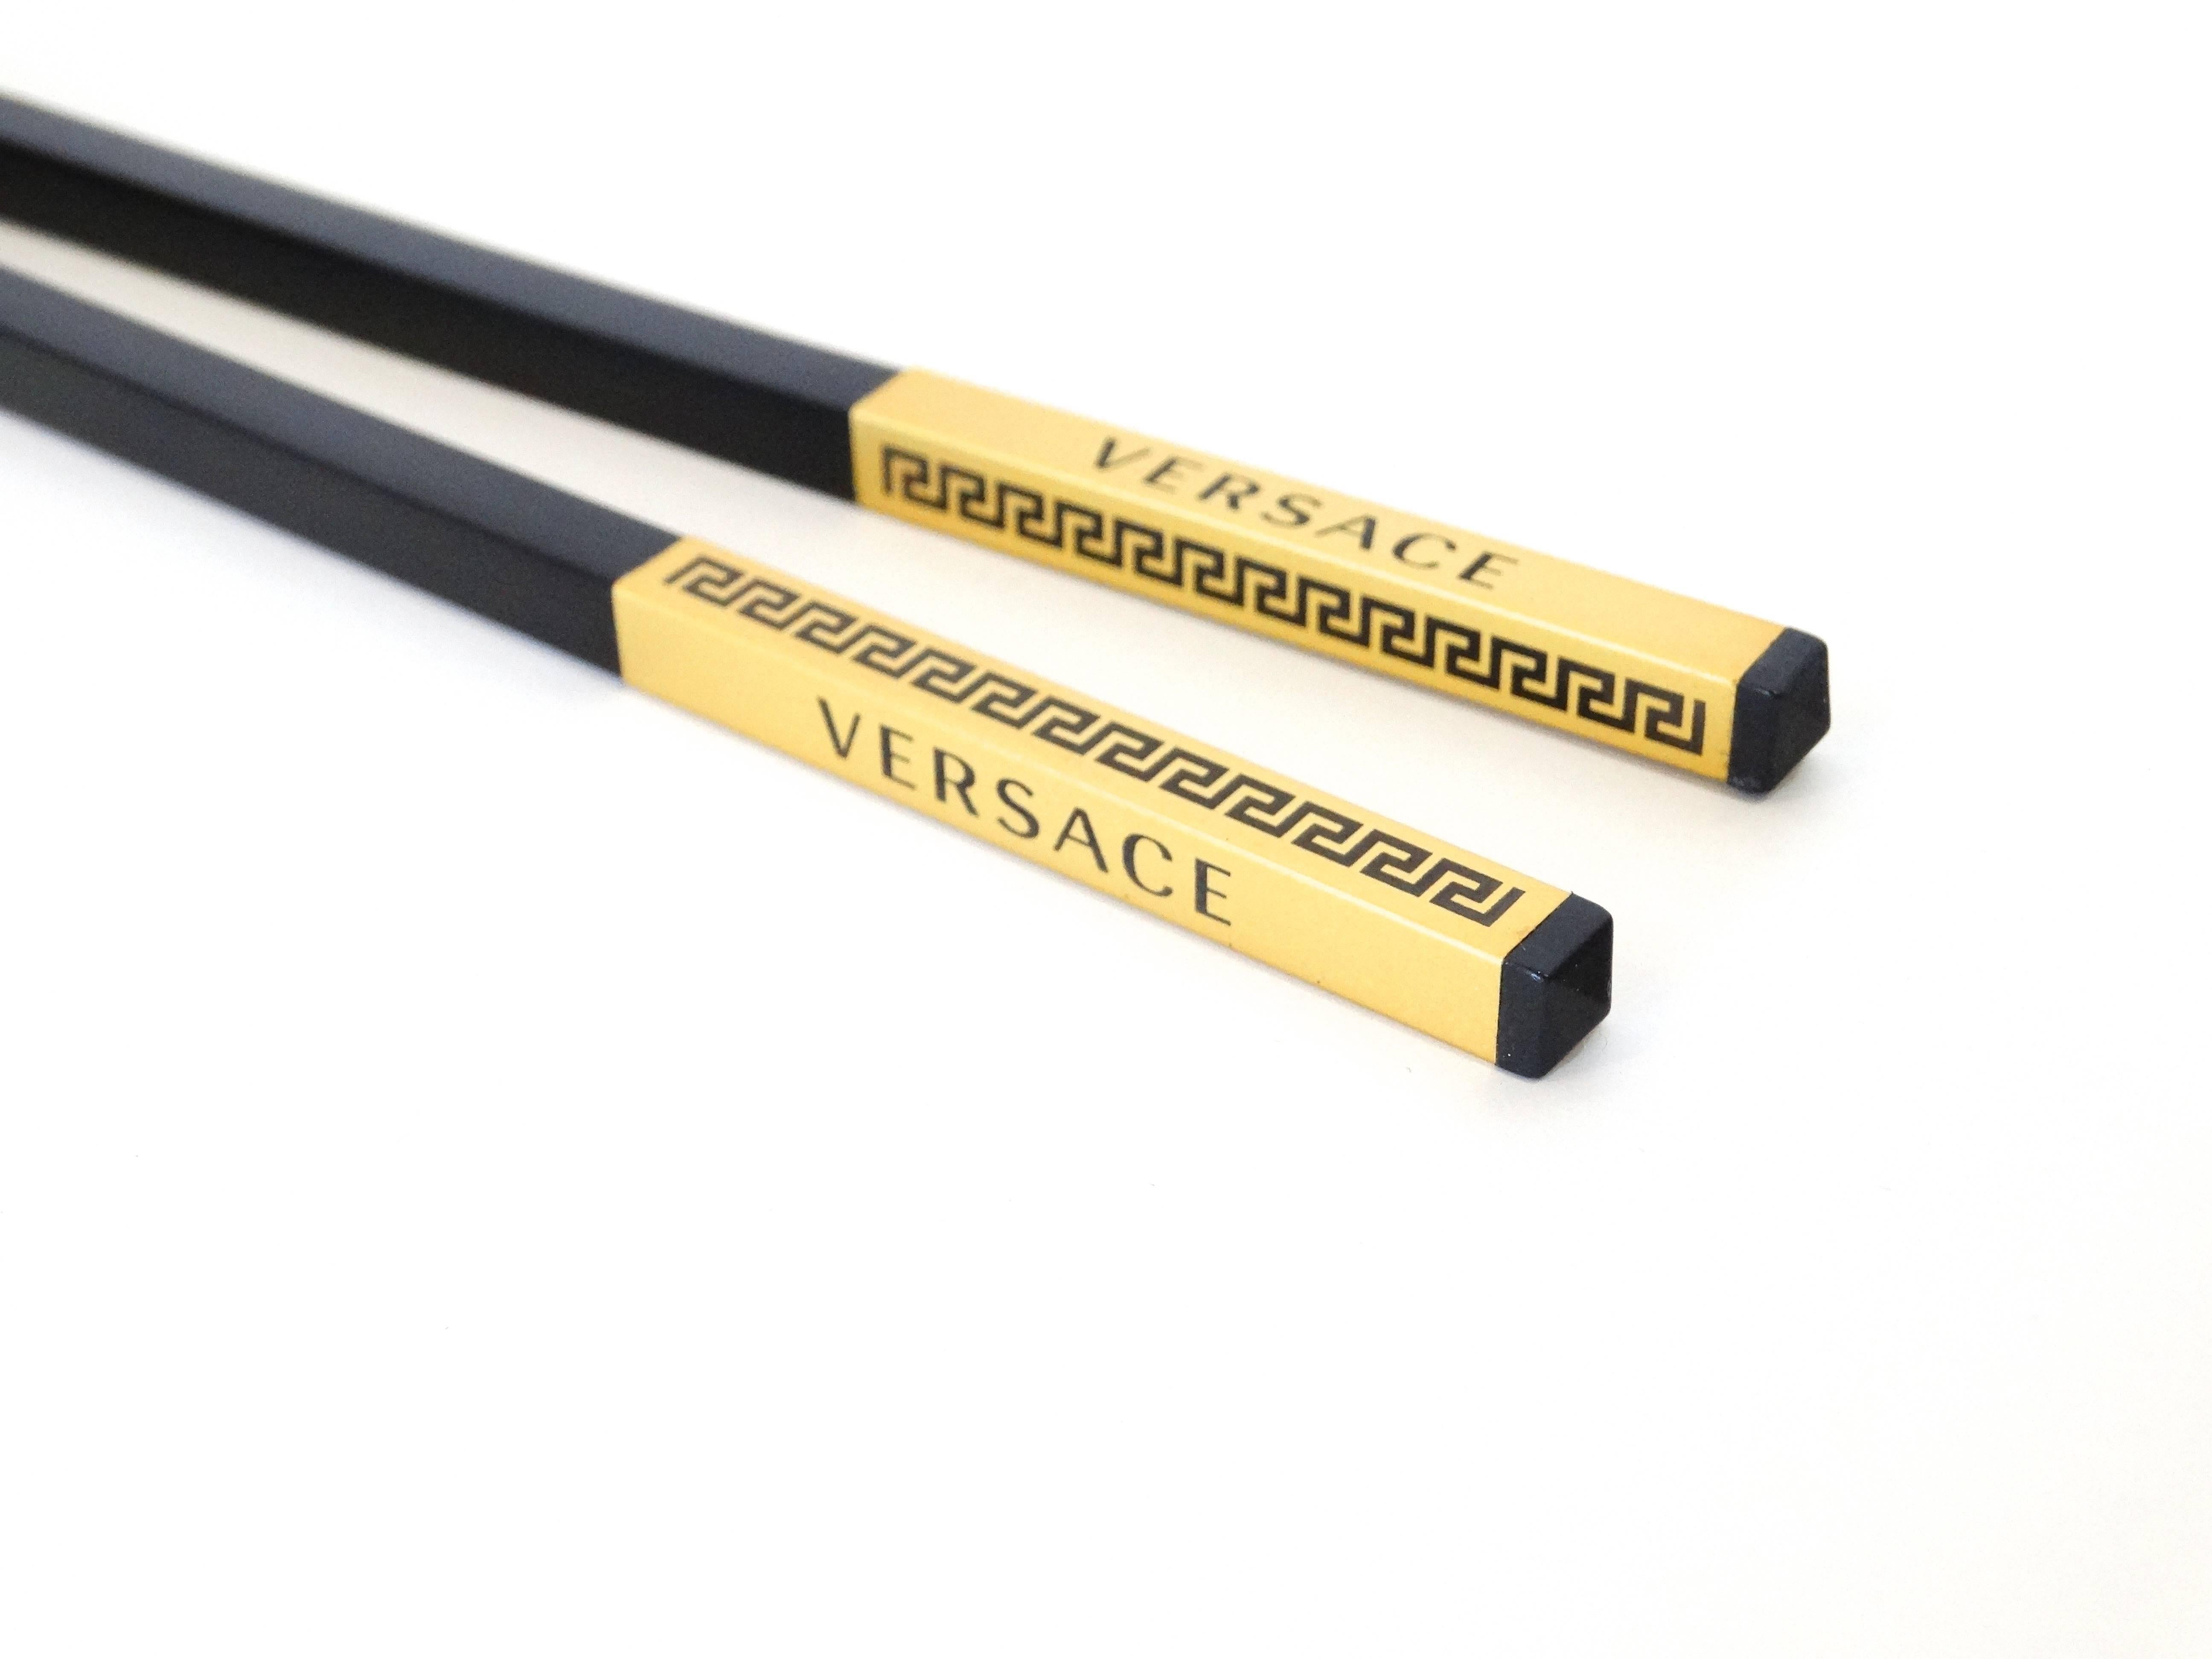 A fabulous set of Versace hair sticks (also chopsticks) a beautiful matte black color with the signature Greek key design in 24kt gold paint Versace logo, these sticks are straight with a slight pointed end. Nine inches in length, use to hold a